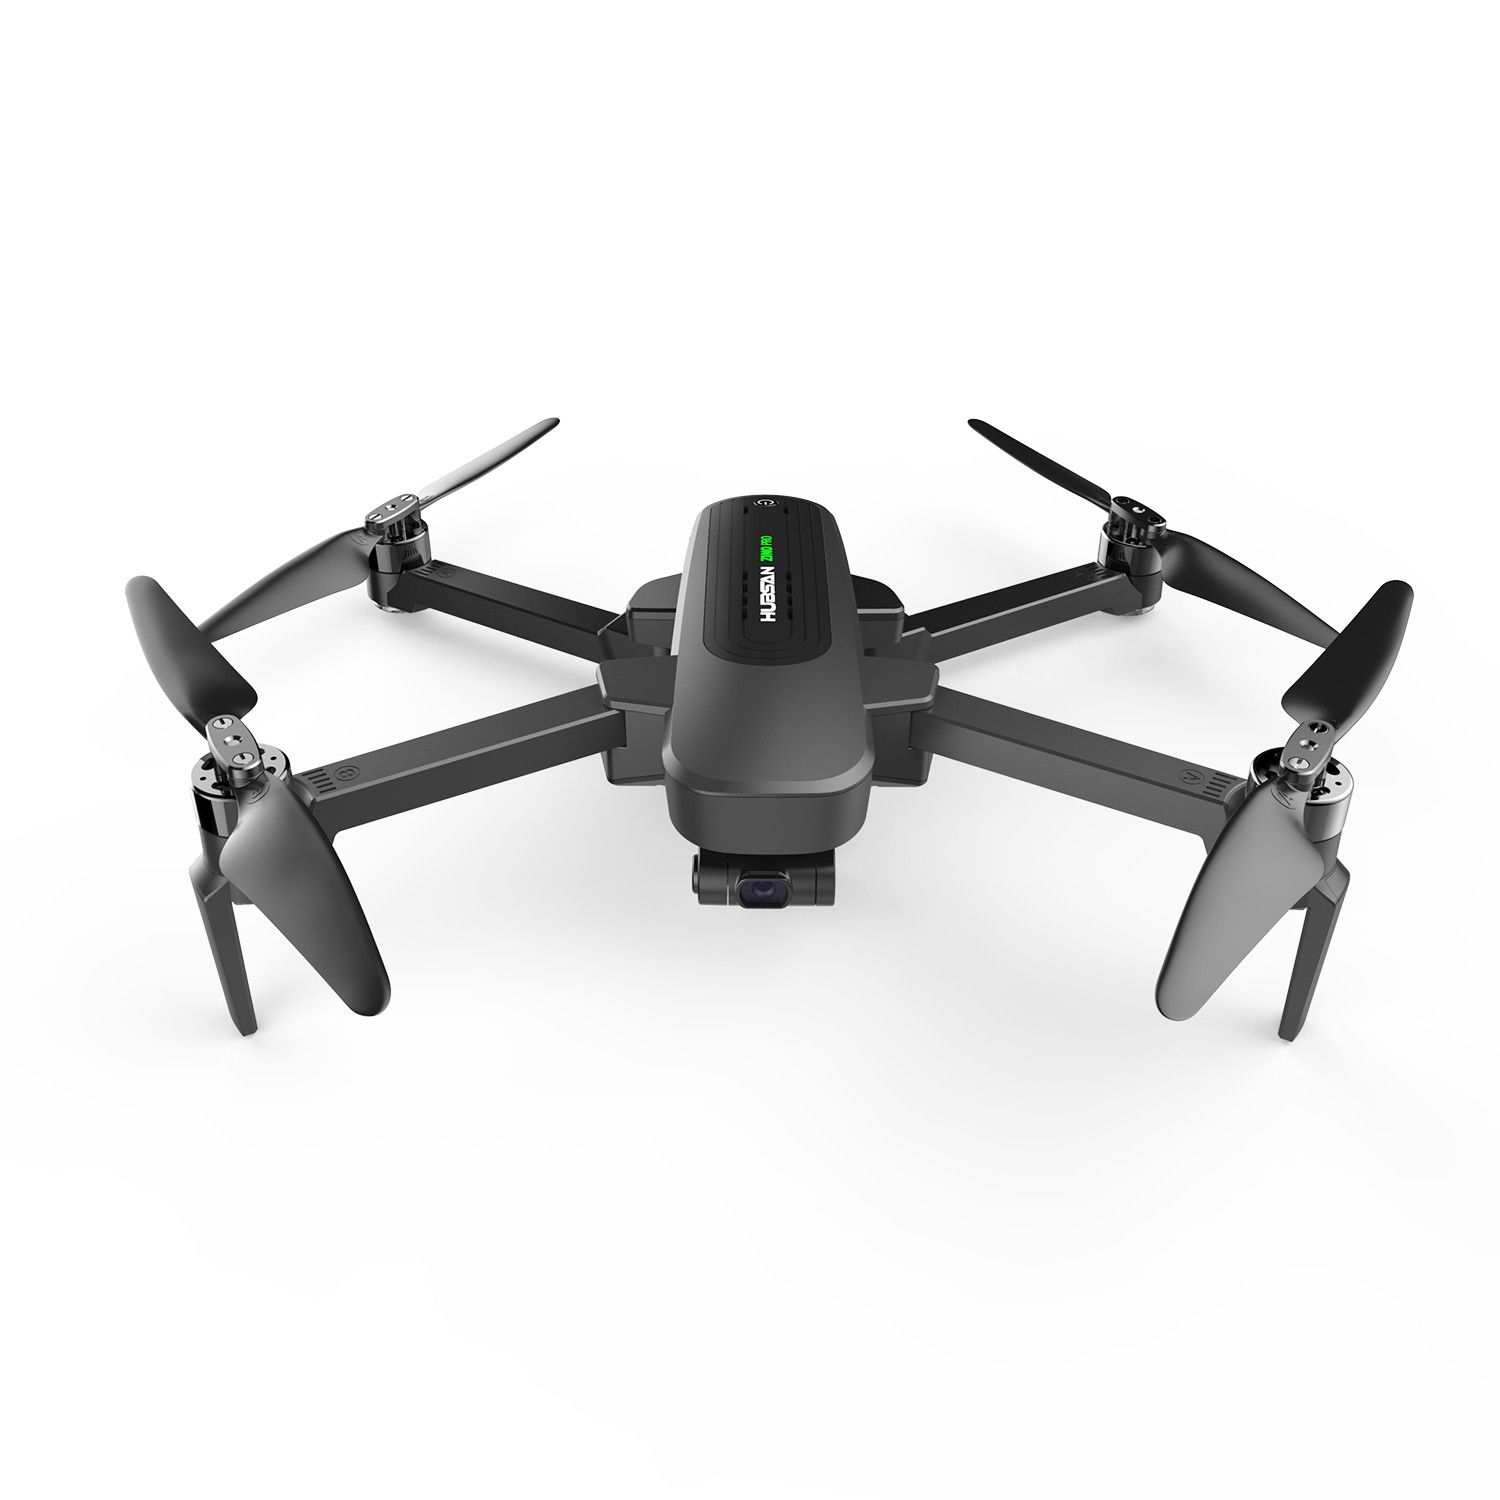 Counsel Dangle protest Buy Hubsan Zino Pro - Hubsan Drone Superstore - Hubsan Drones